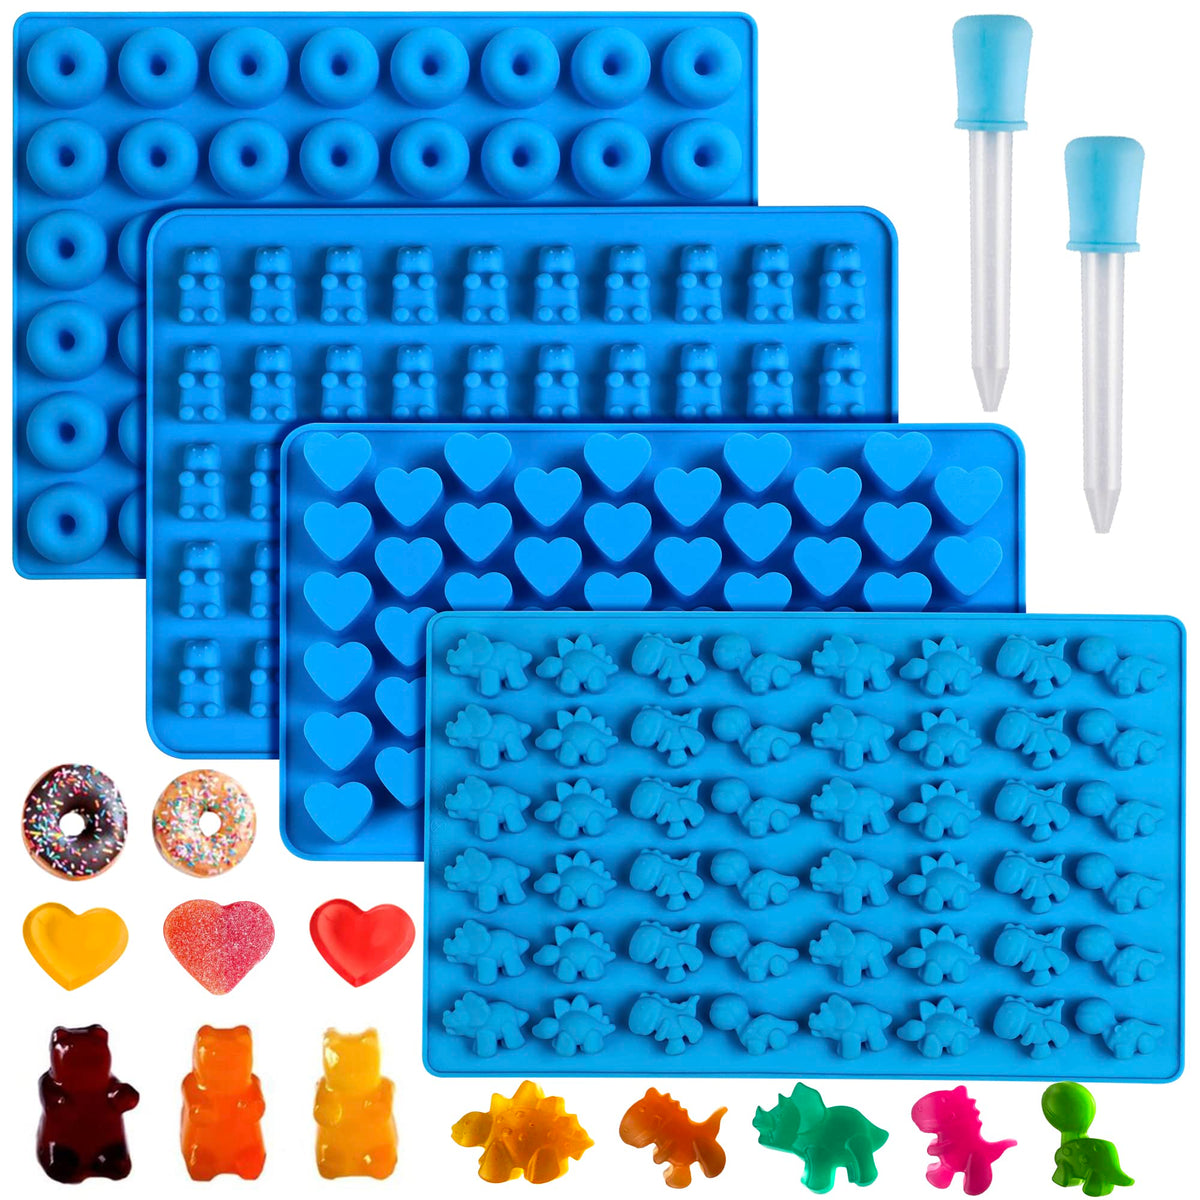 Gummy Molds Bear Candy Silicone - Mini Size Chocolate Gummy Molds with 2  Droppers Nonstick Food Grade Silicone Pack of 4